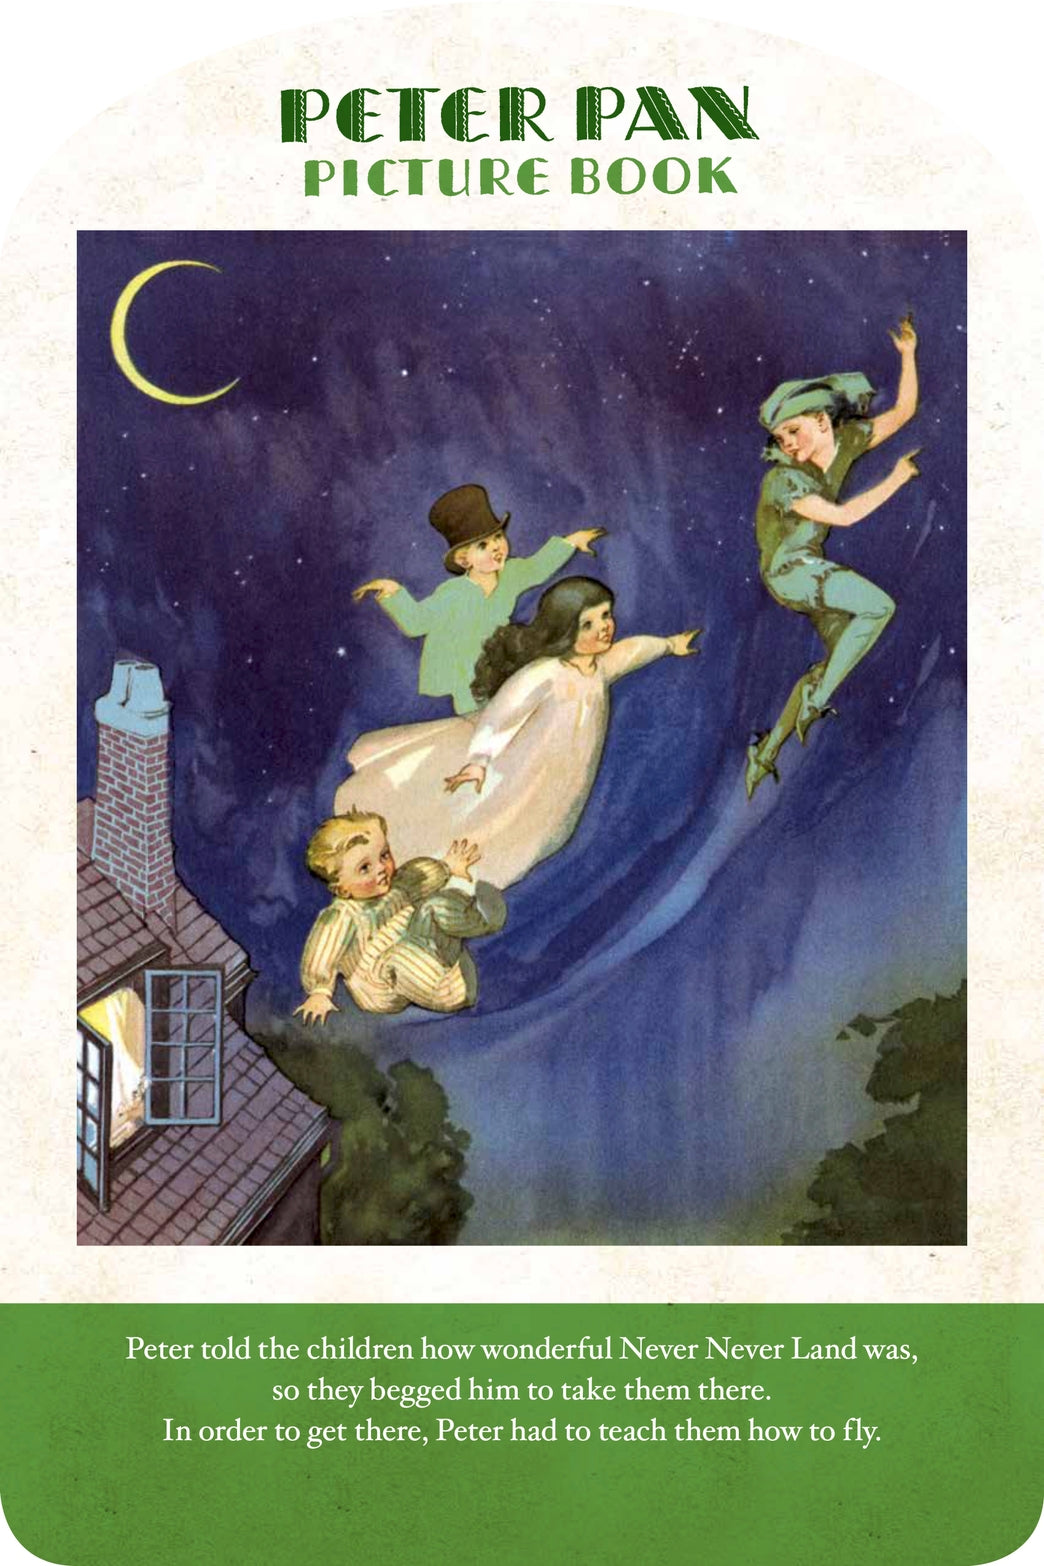 Peter Pan Vintage Picture Book